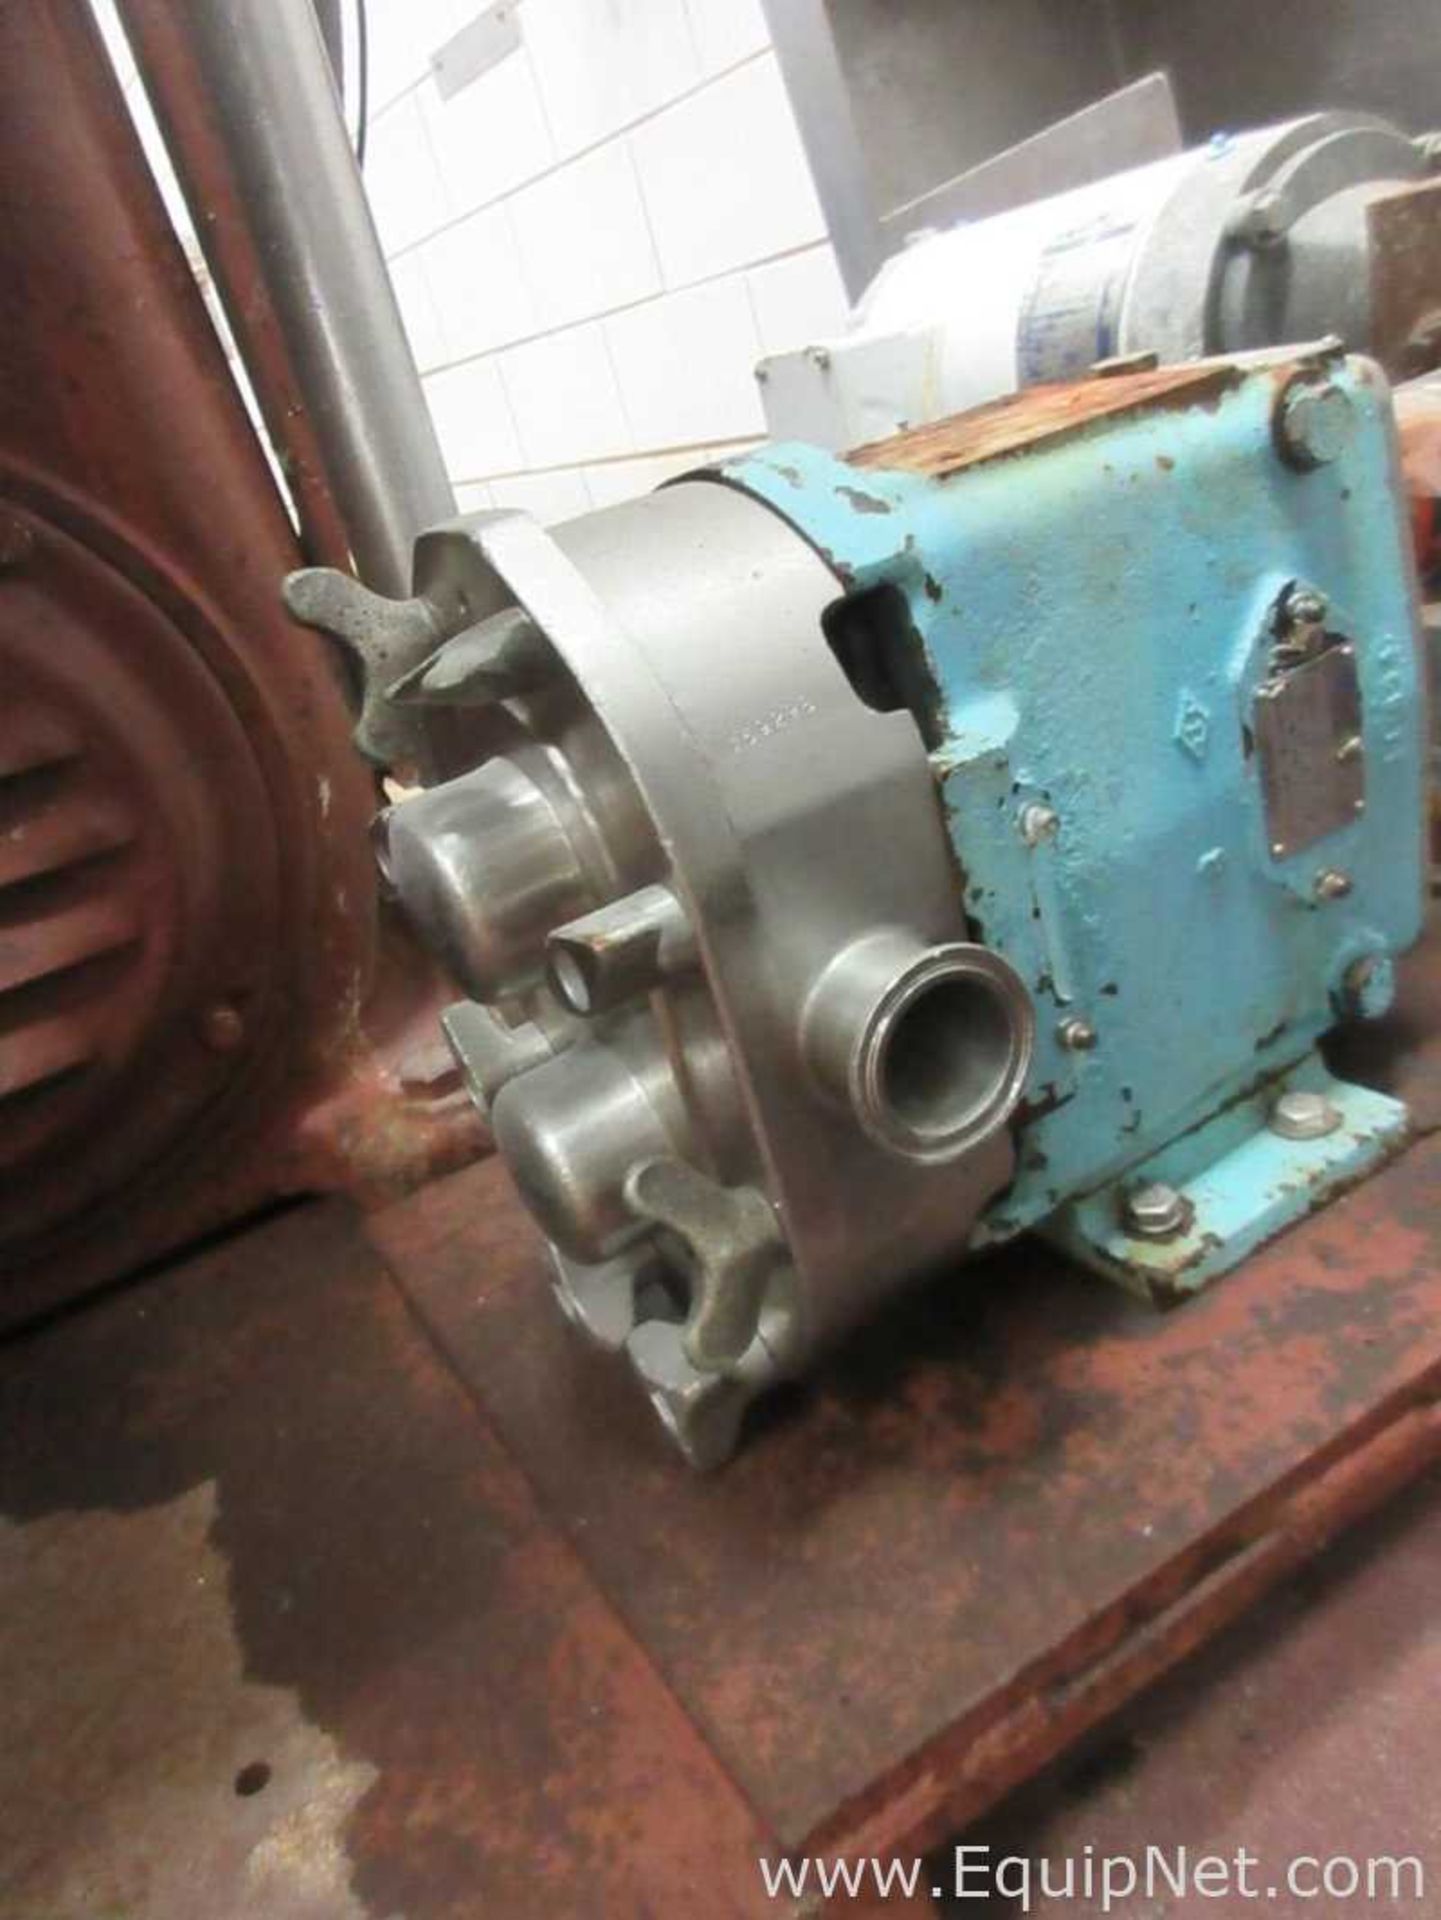 Whipper And Waukesha Positive Displacement Pump - Image 7 of 12